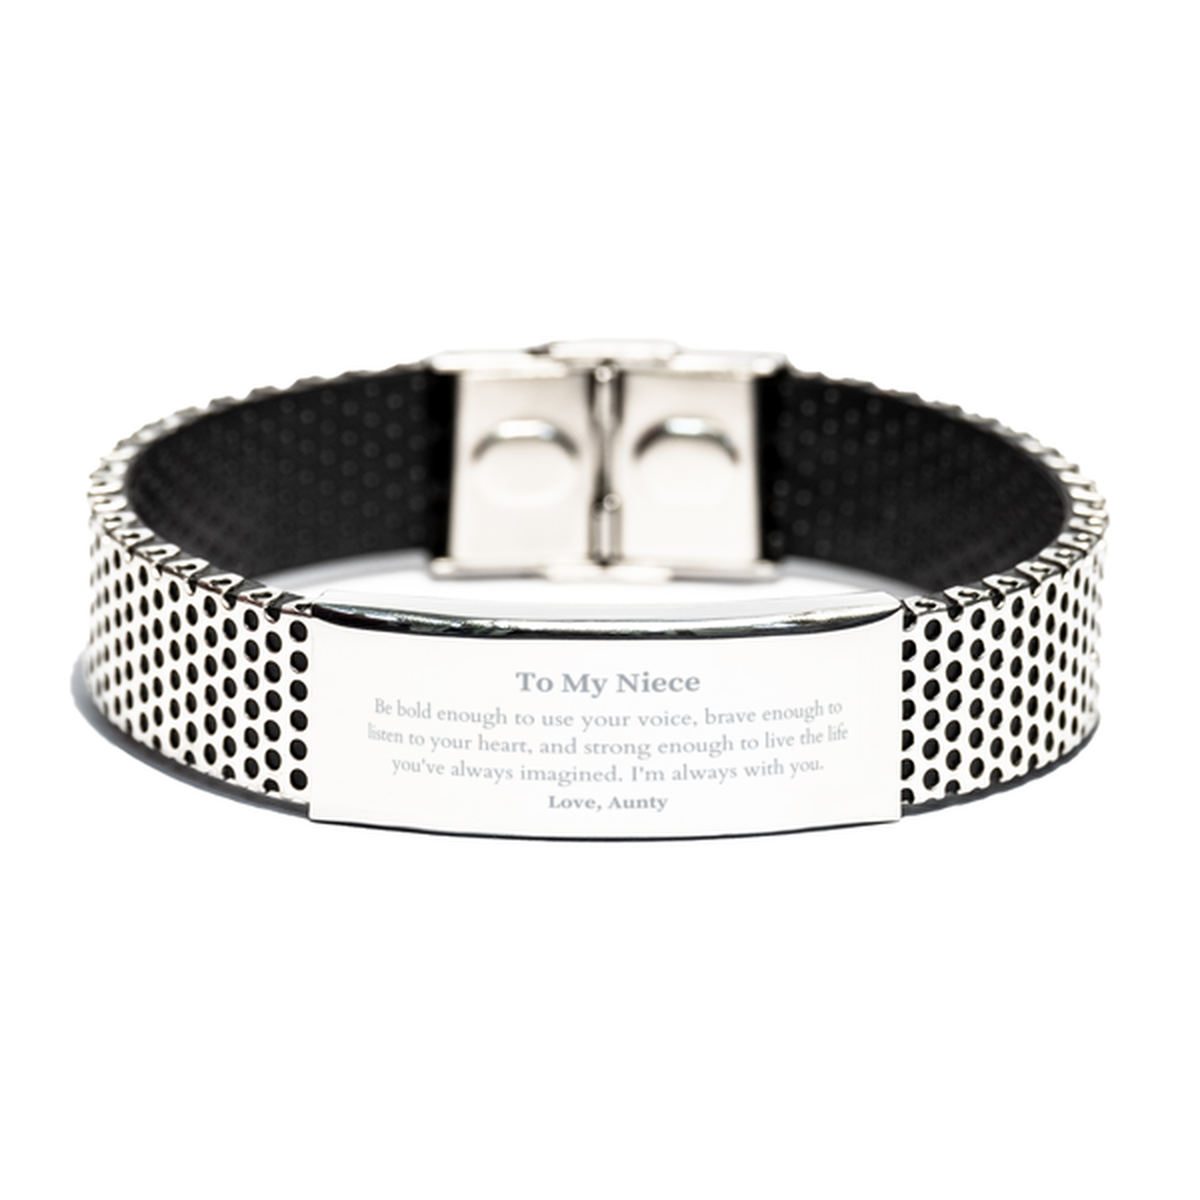 Keepsake Niece Stainless Steel Bracelet Gift Idea Graduation Christmas Birthday Niece from Aunty, Niece Be bold enough to use your voice, brave enough to listen to your heart. Love, Aunty